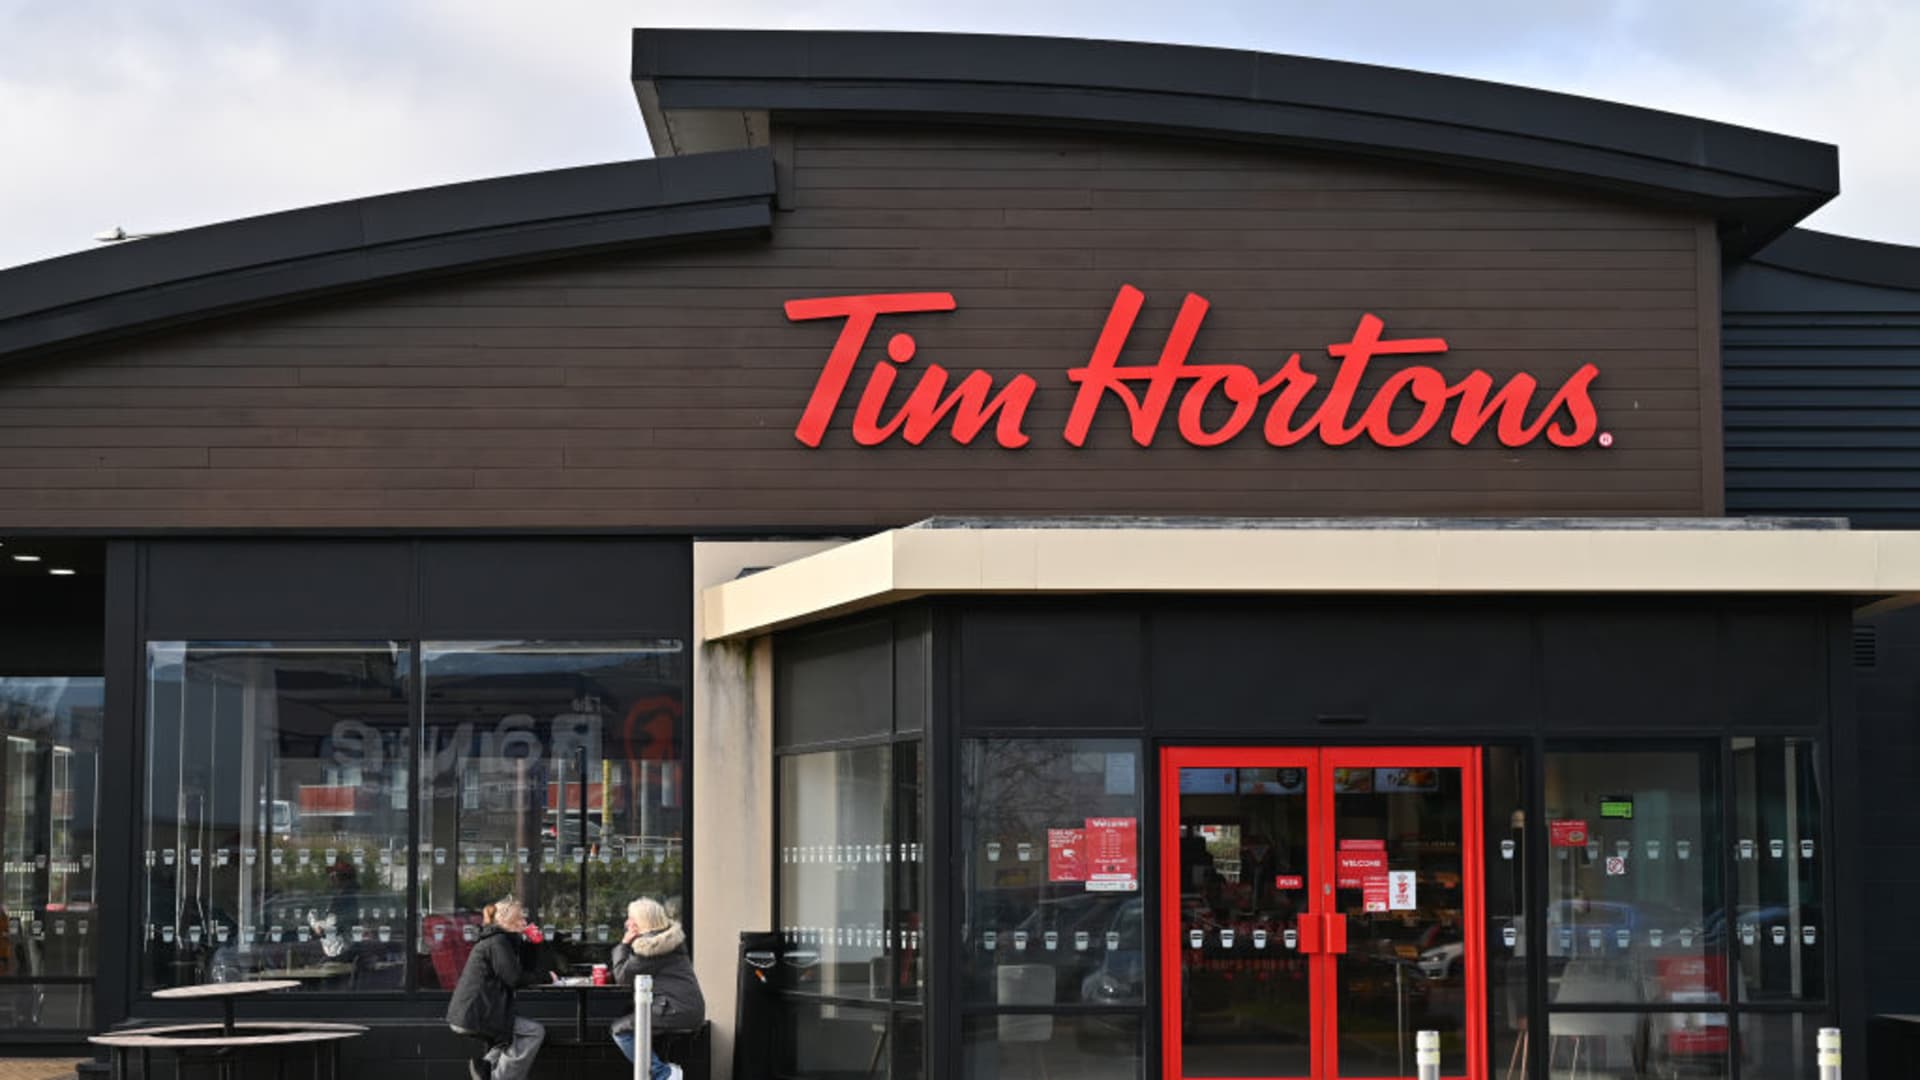 Restaurant Brands earnings beat estimates, fueled by strong Tim Hortons sales